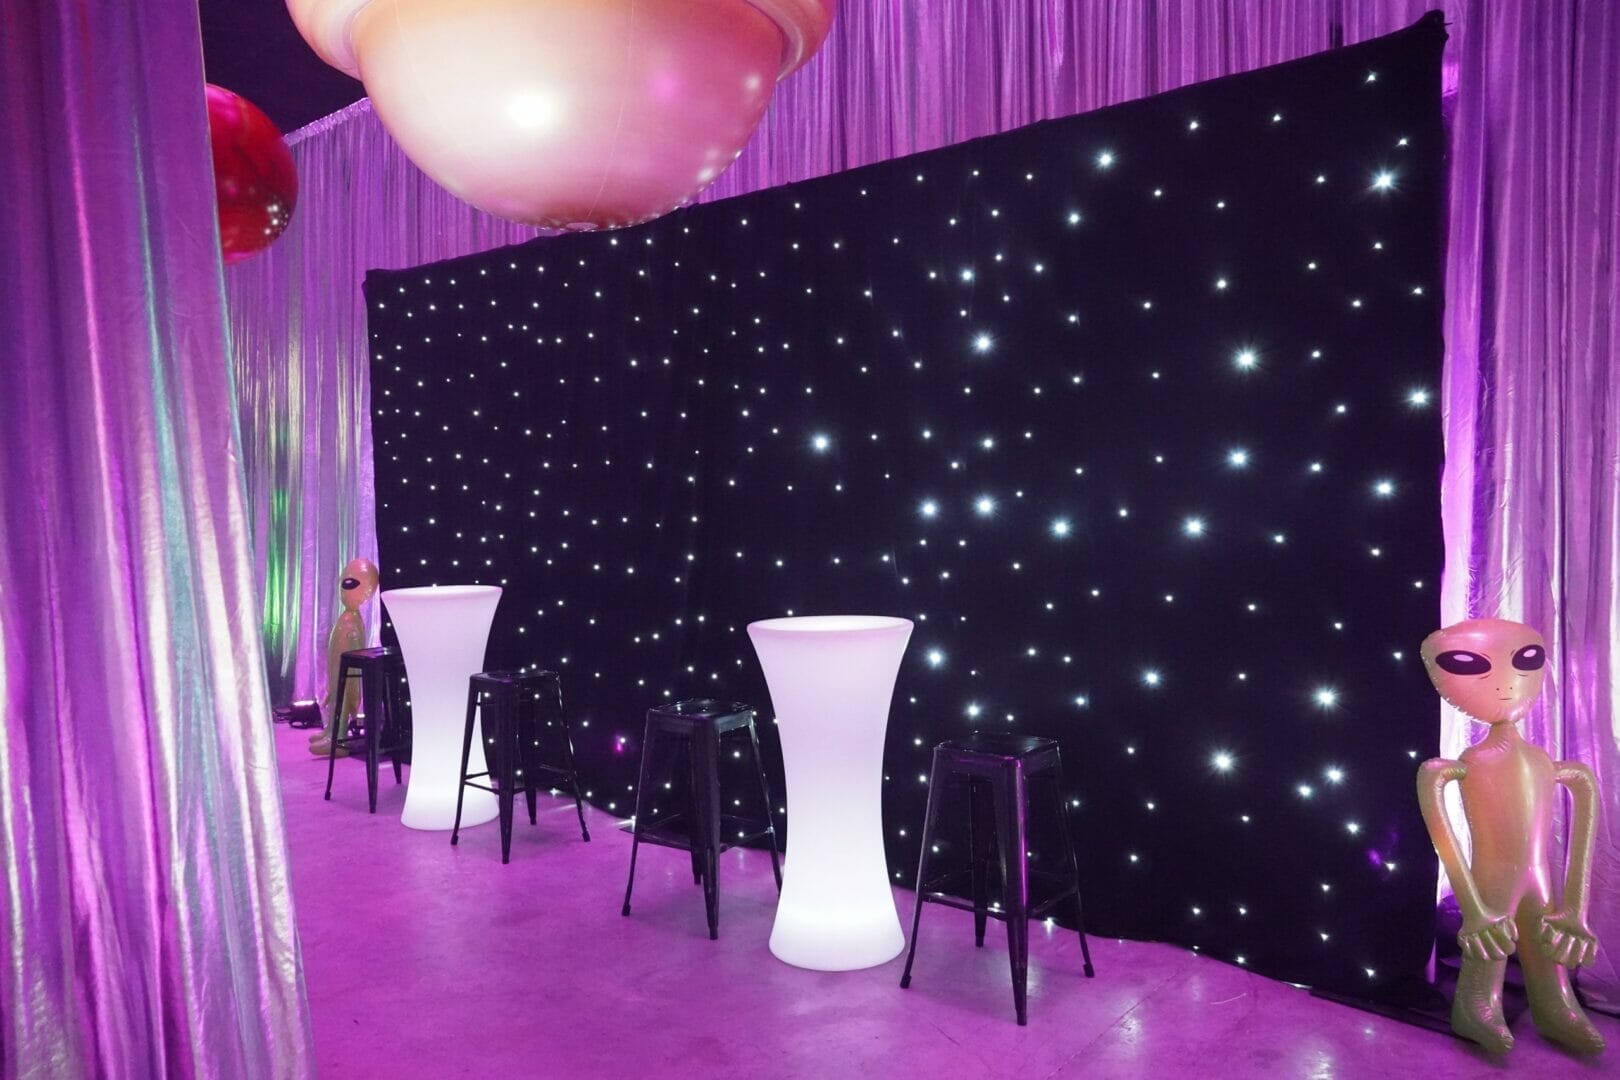 Starlight cloth drape and led furniture at space themed party